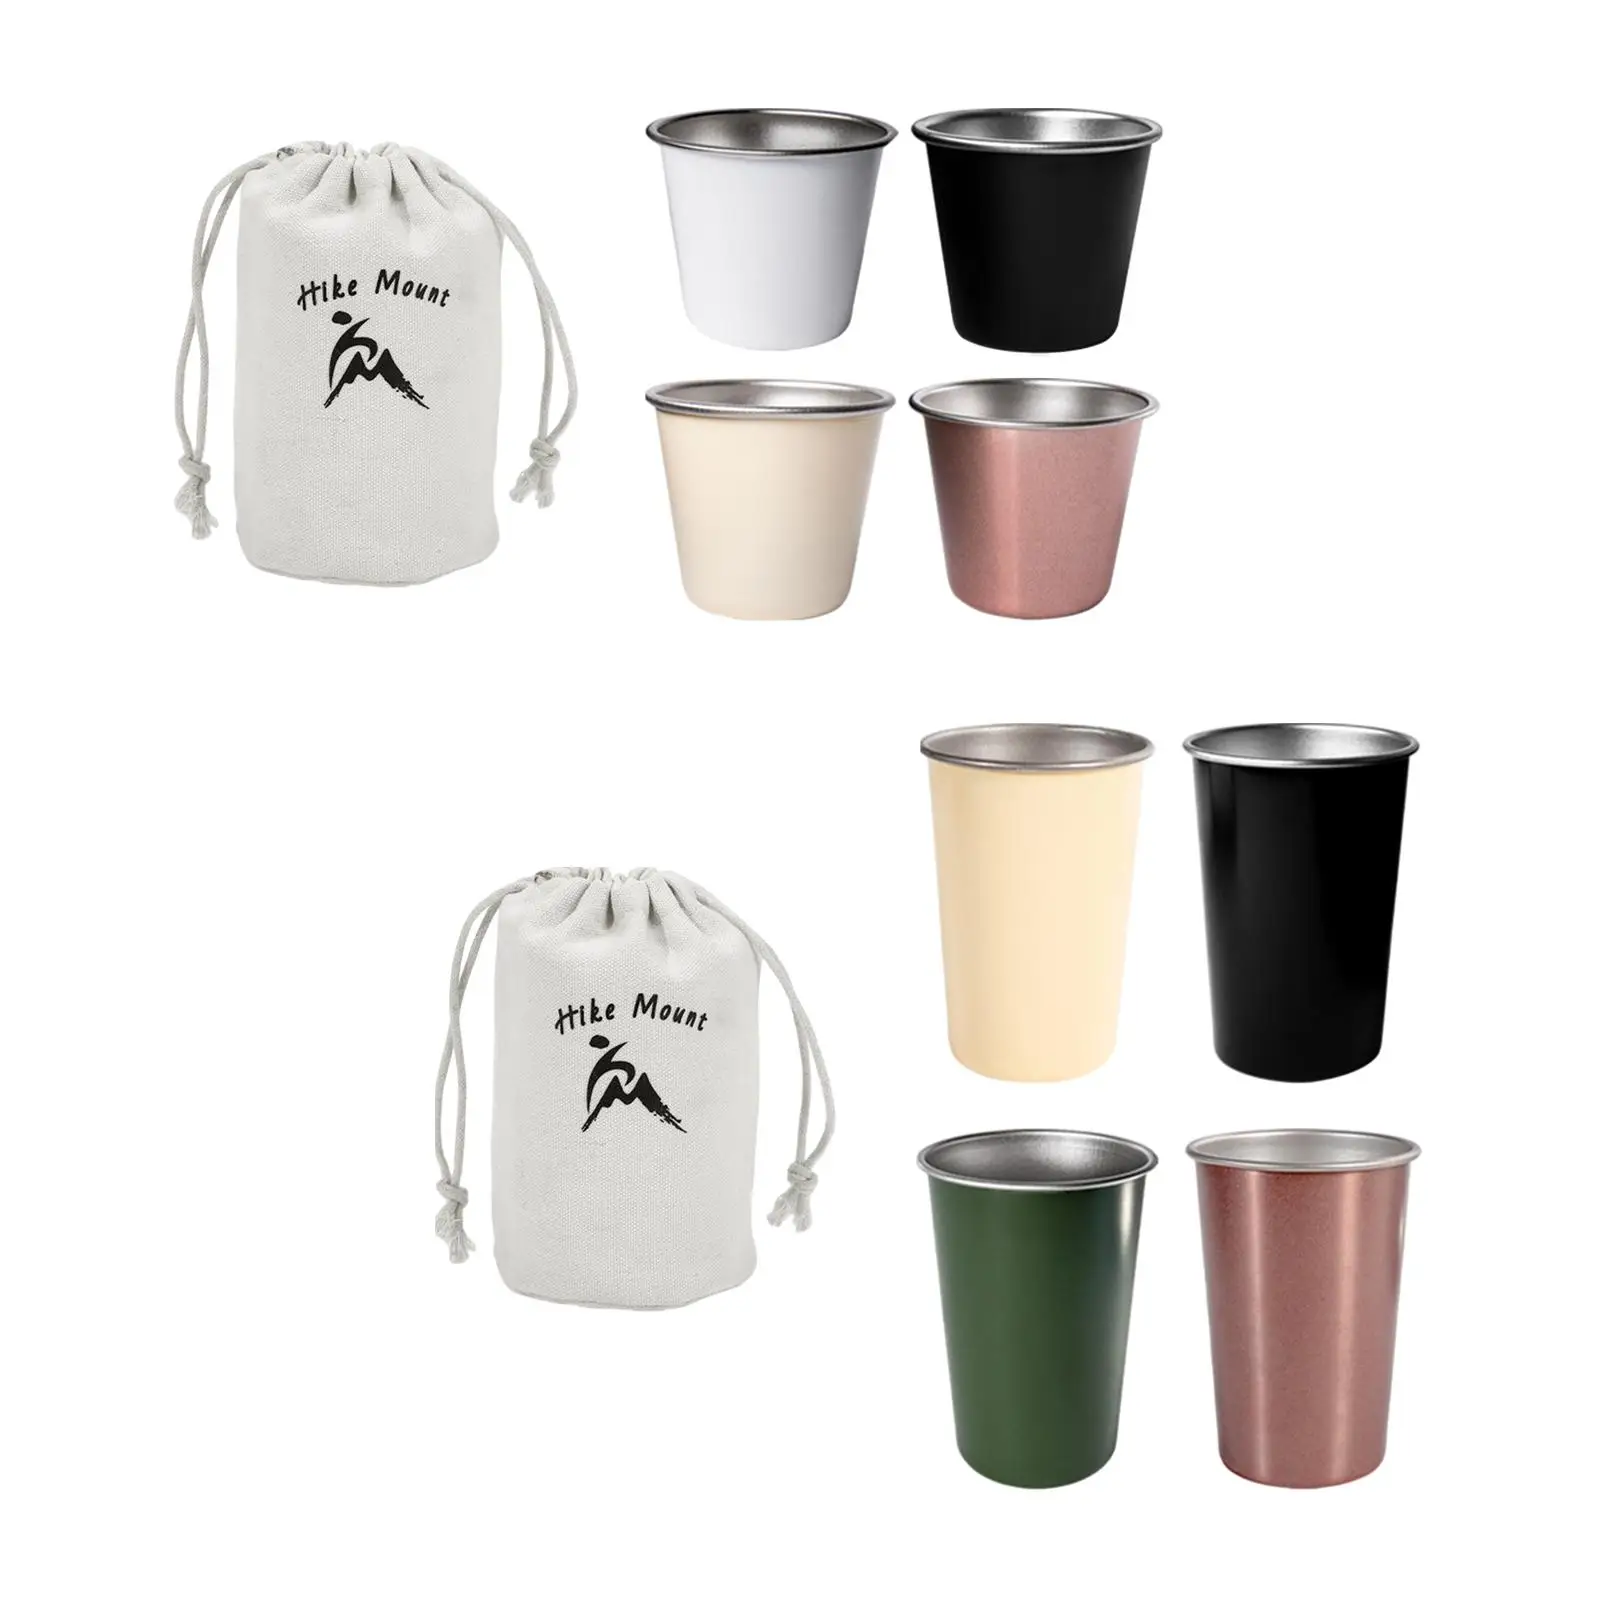 4x Stainless Steel Cups Camping Coffee Mug Water Cup Lightweight Drinking Cups with Storage Bag for Picnic Trip Fishing